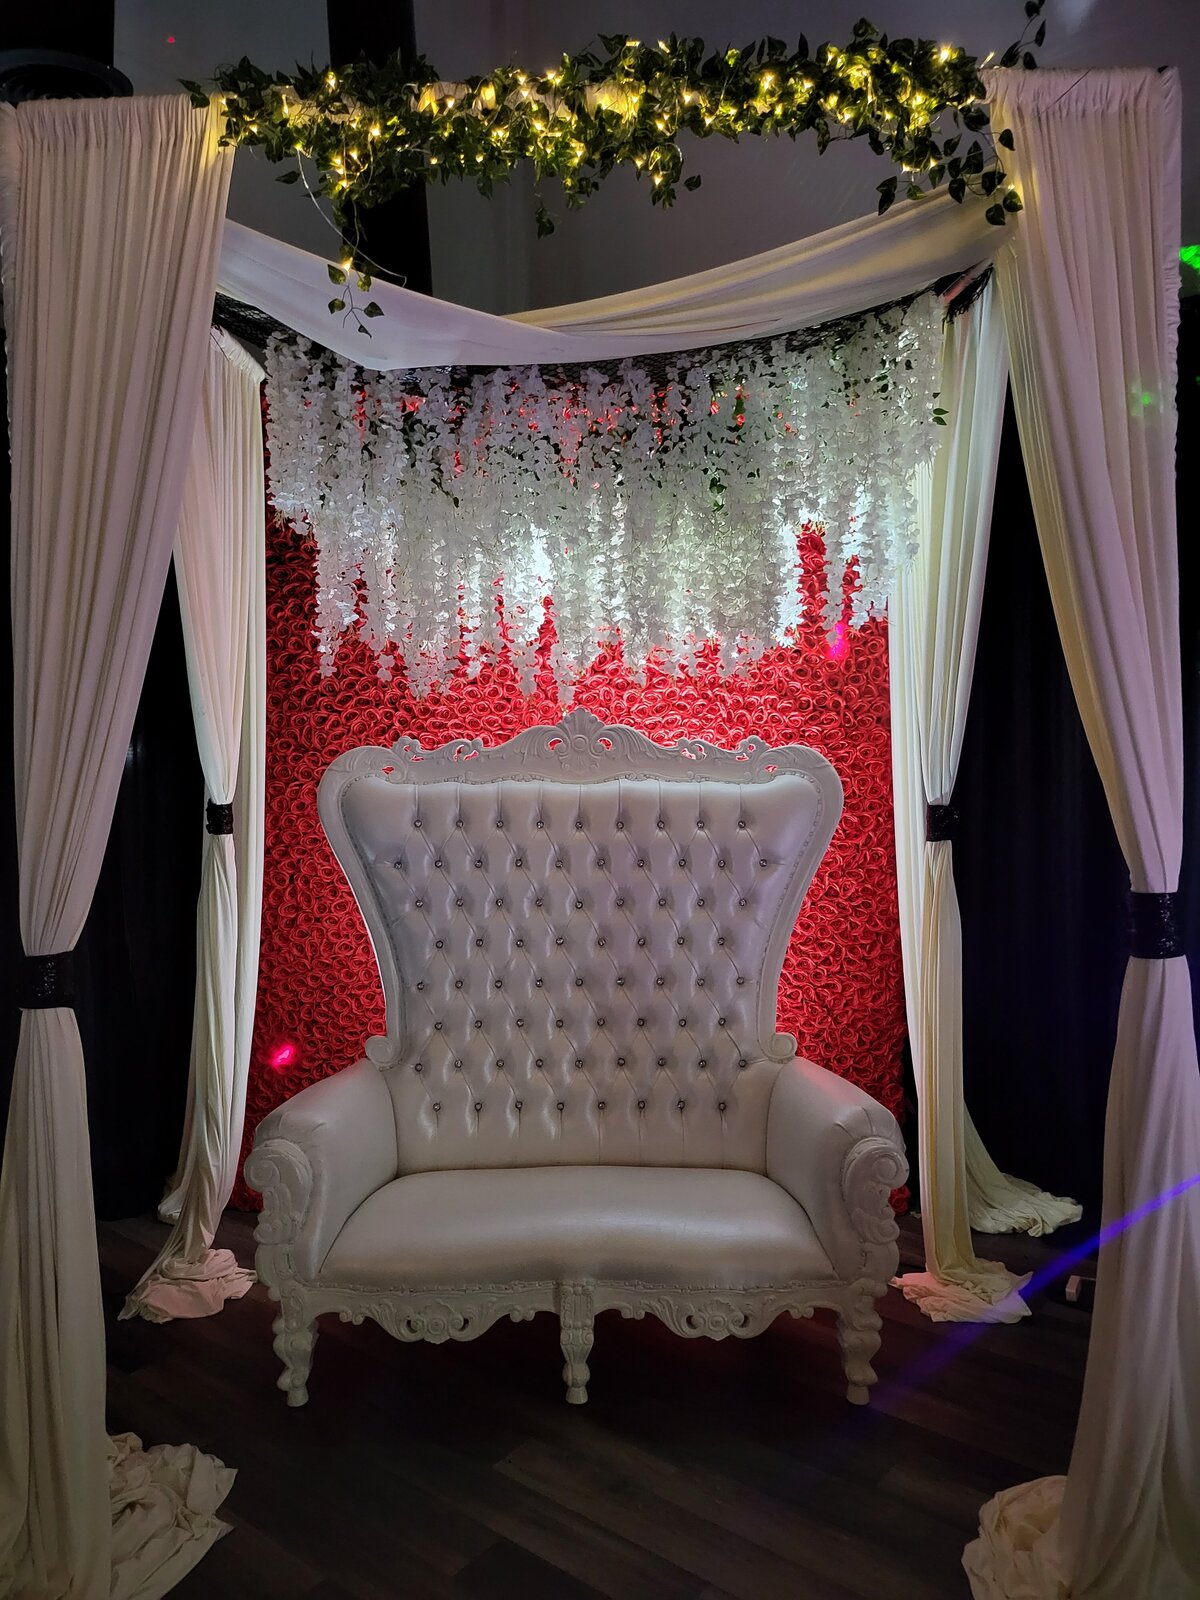 Throne Chair Rental in Metro Detroit Event Space 2